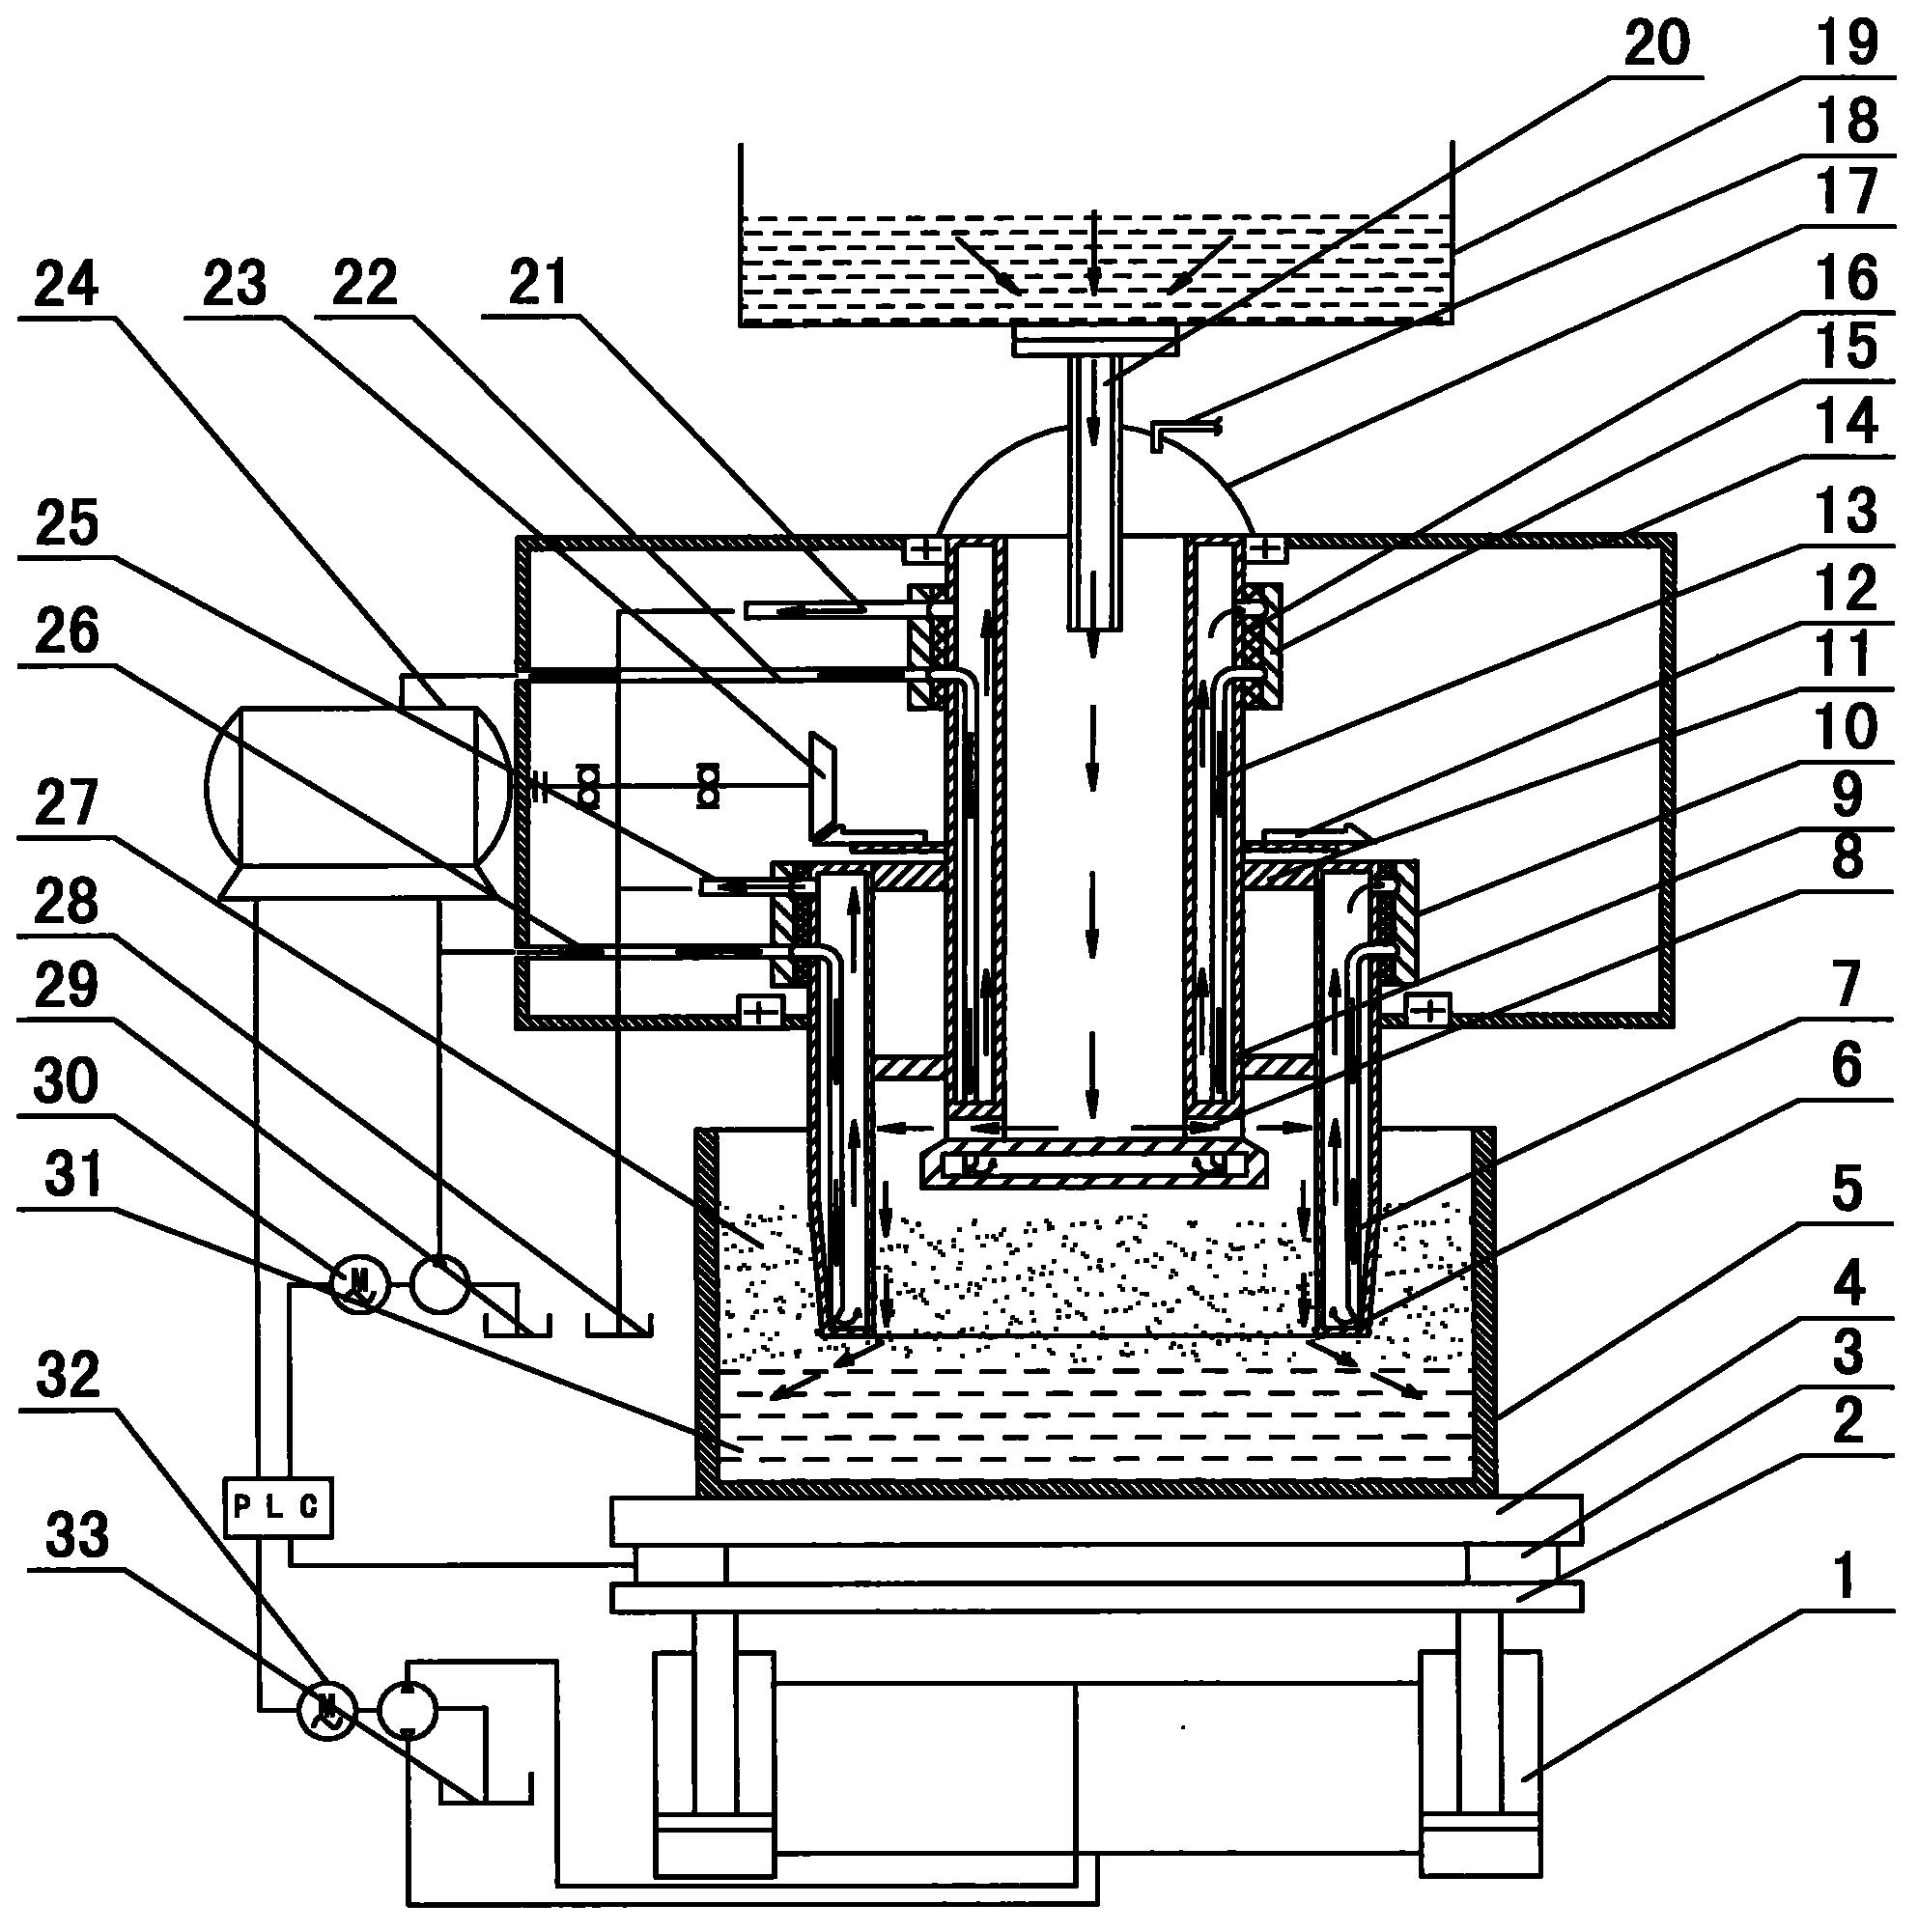 Equipment and method for removing nonmetallic slag inclusion in steel and iron smelting process